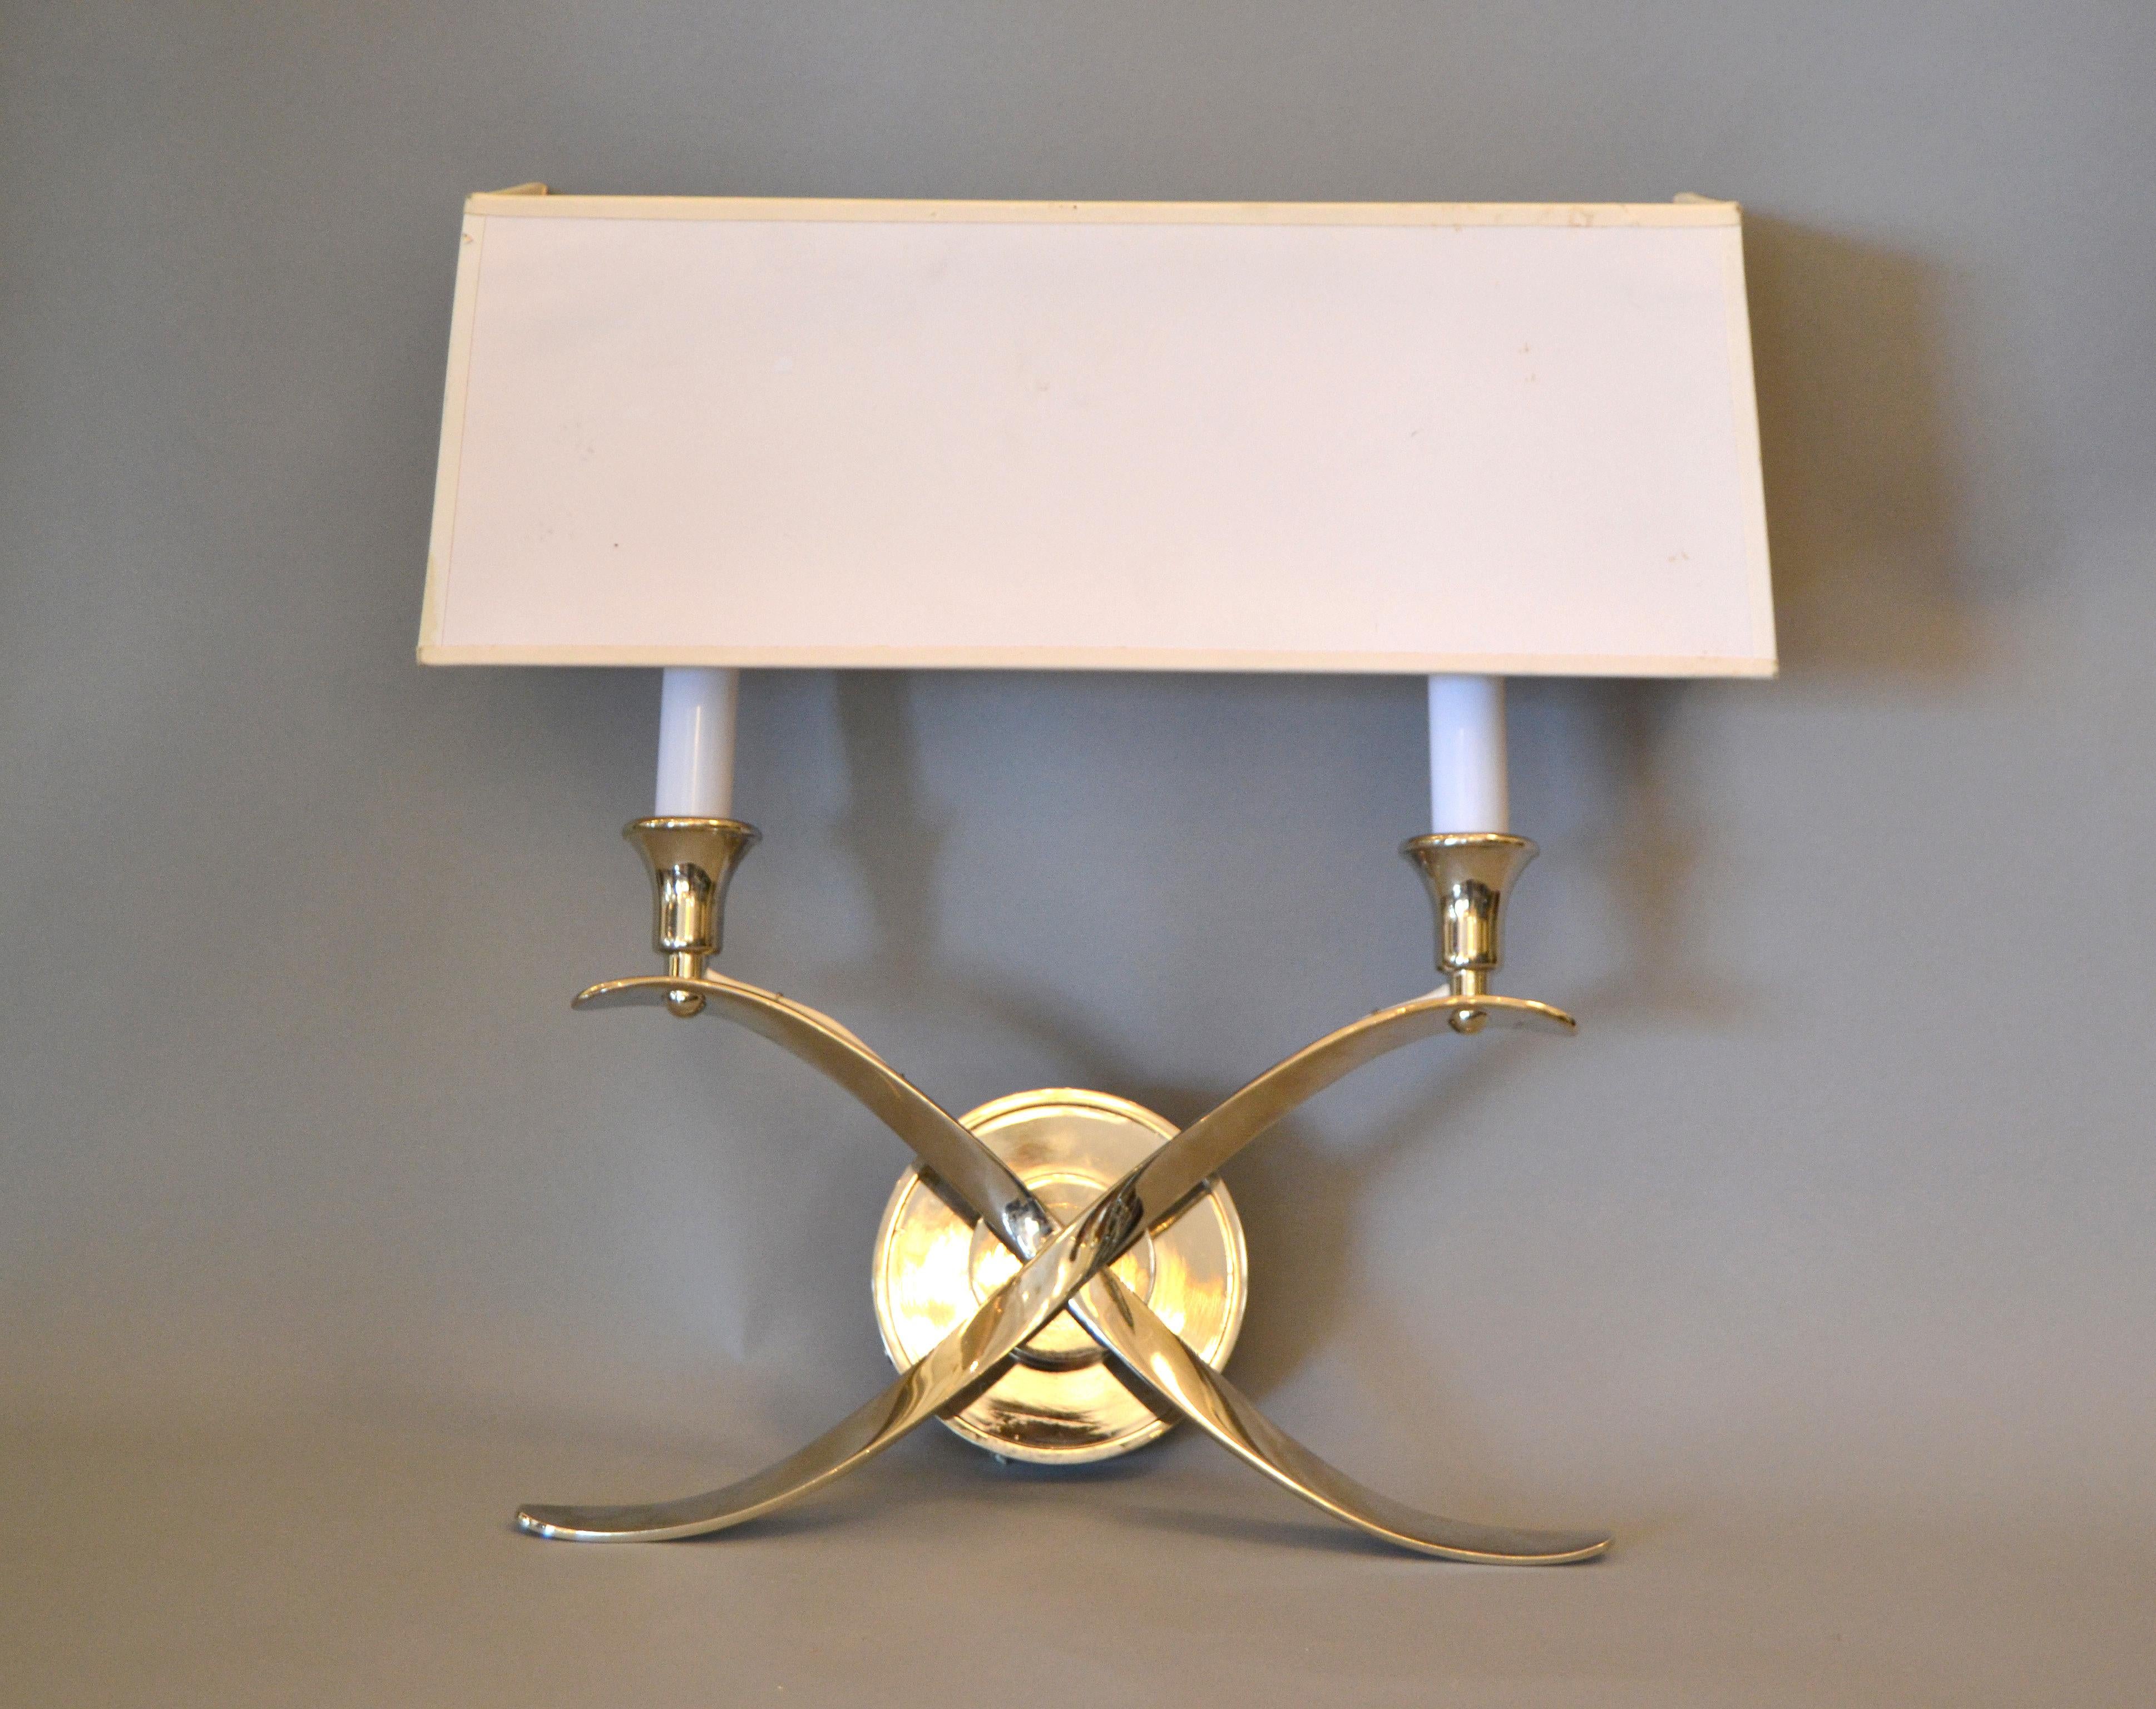 A pair of modern stainless steel double sconces designed with clip on paper shades.
Elegantly crossed scrollwork that holds two candle-style lights, each uses 2 candelabra light bulbs with max. 40 watts.
The pair is a stunning accent for Classic